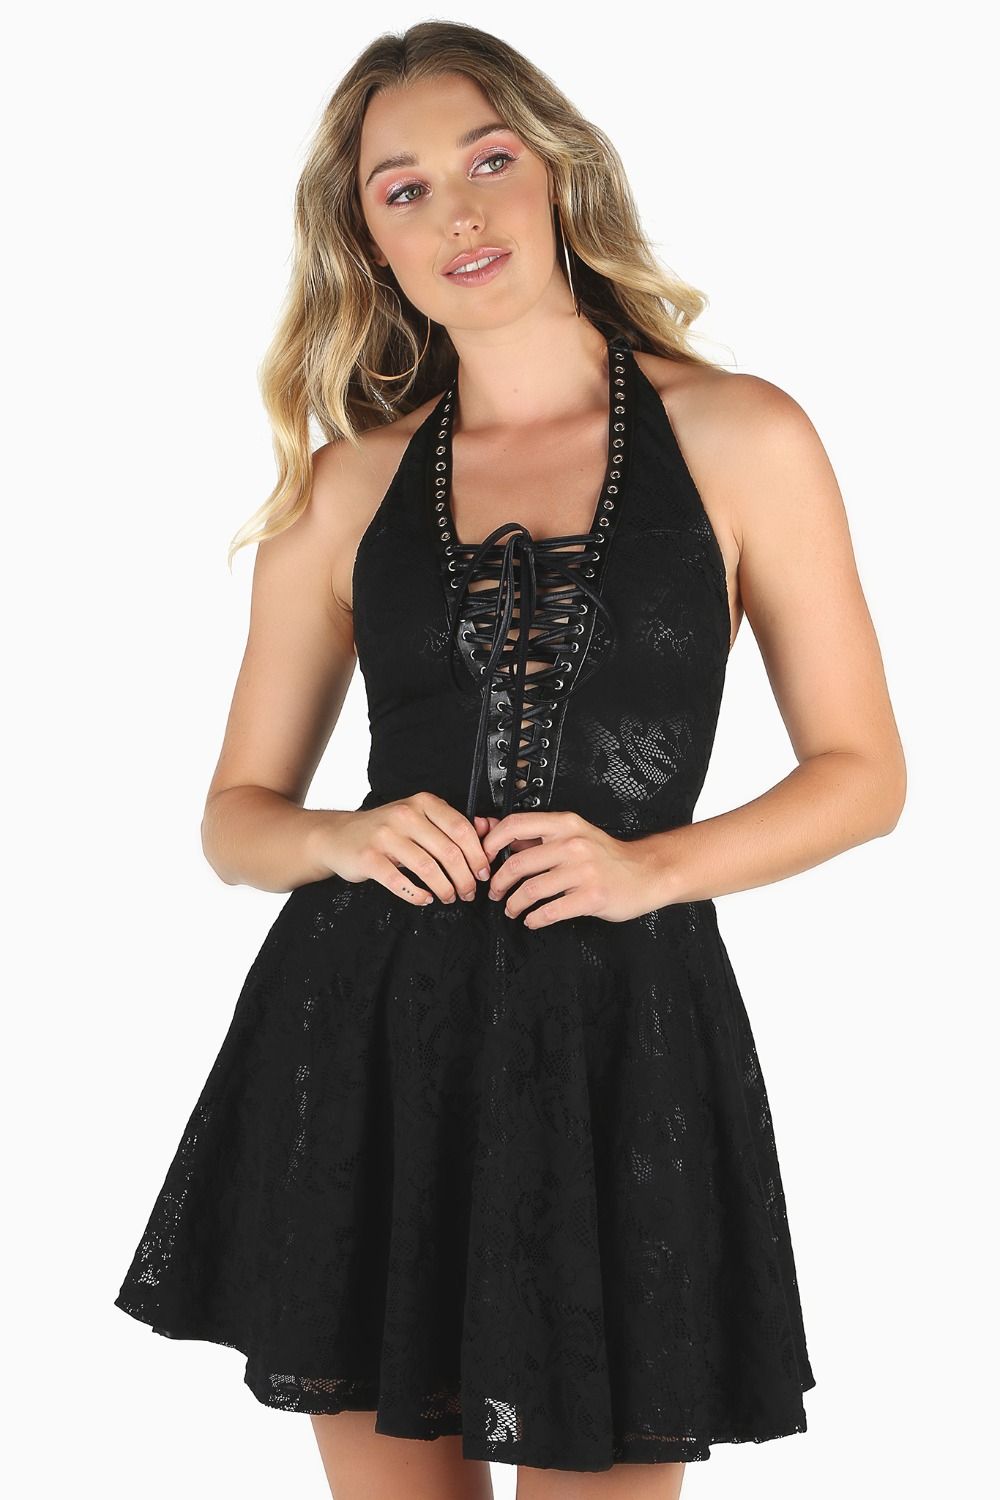 Dark Queen Lace Up Dress - Limited 